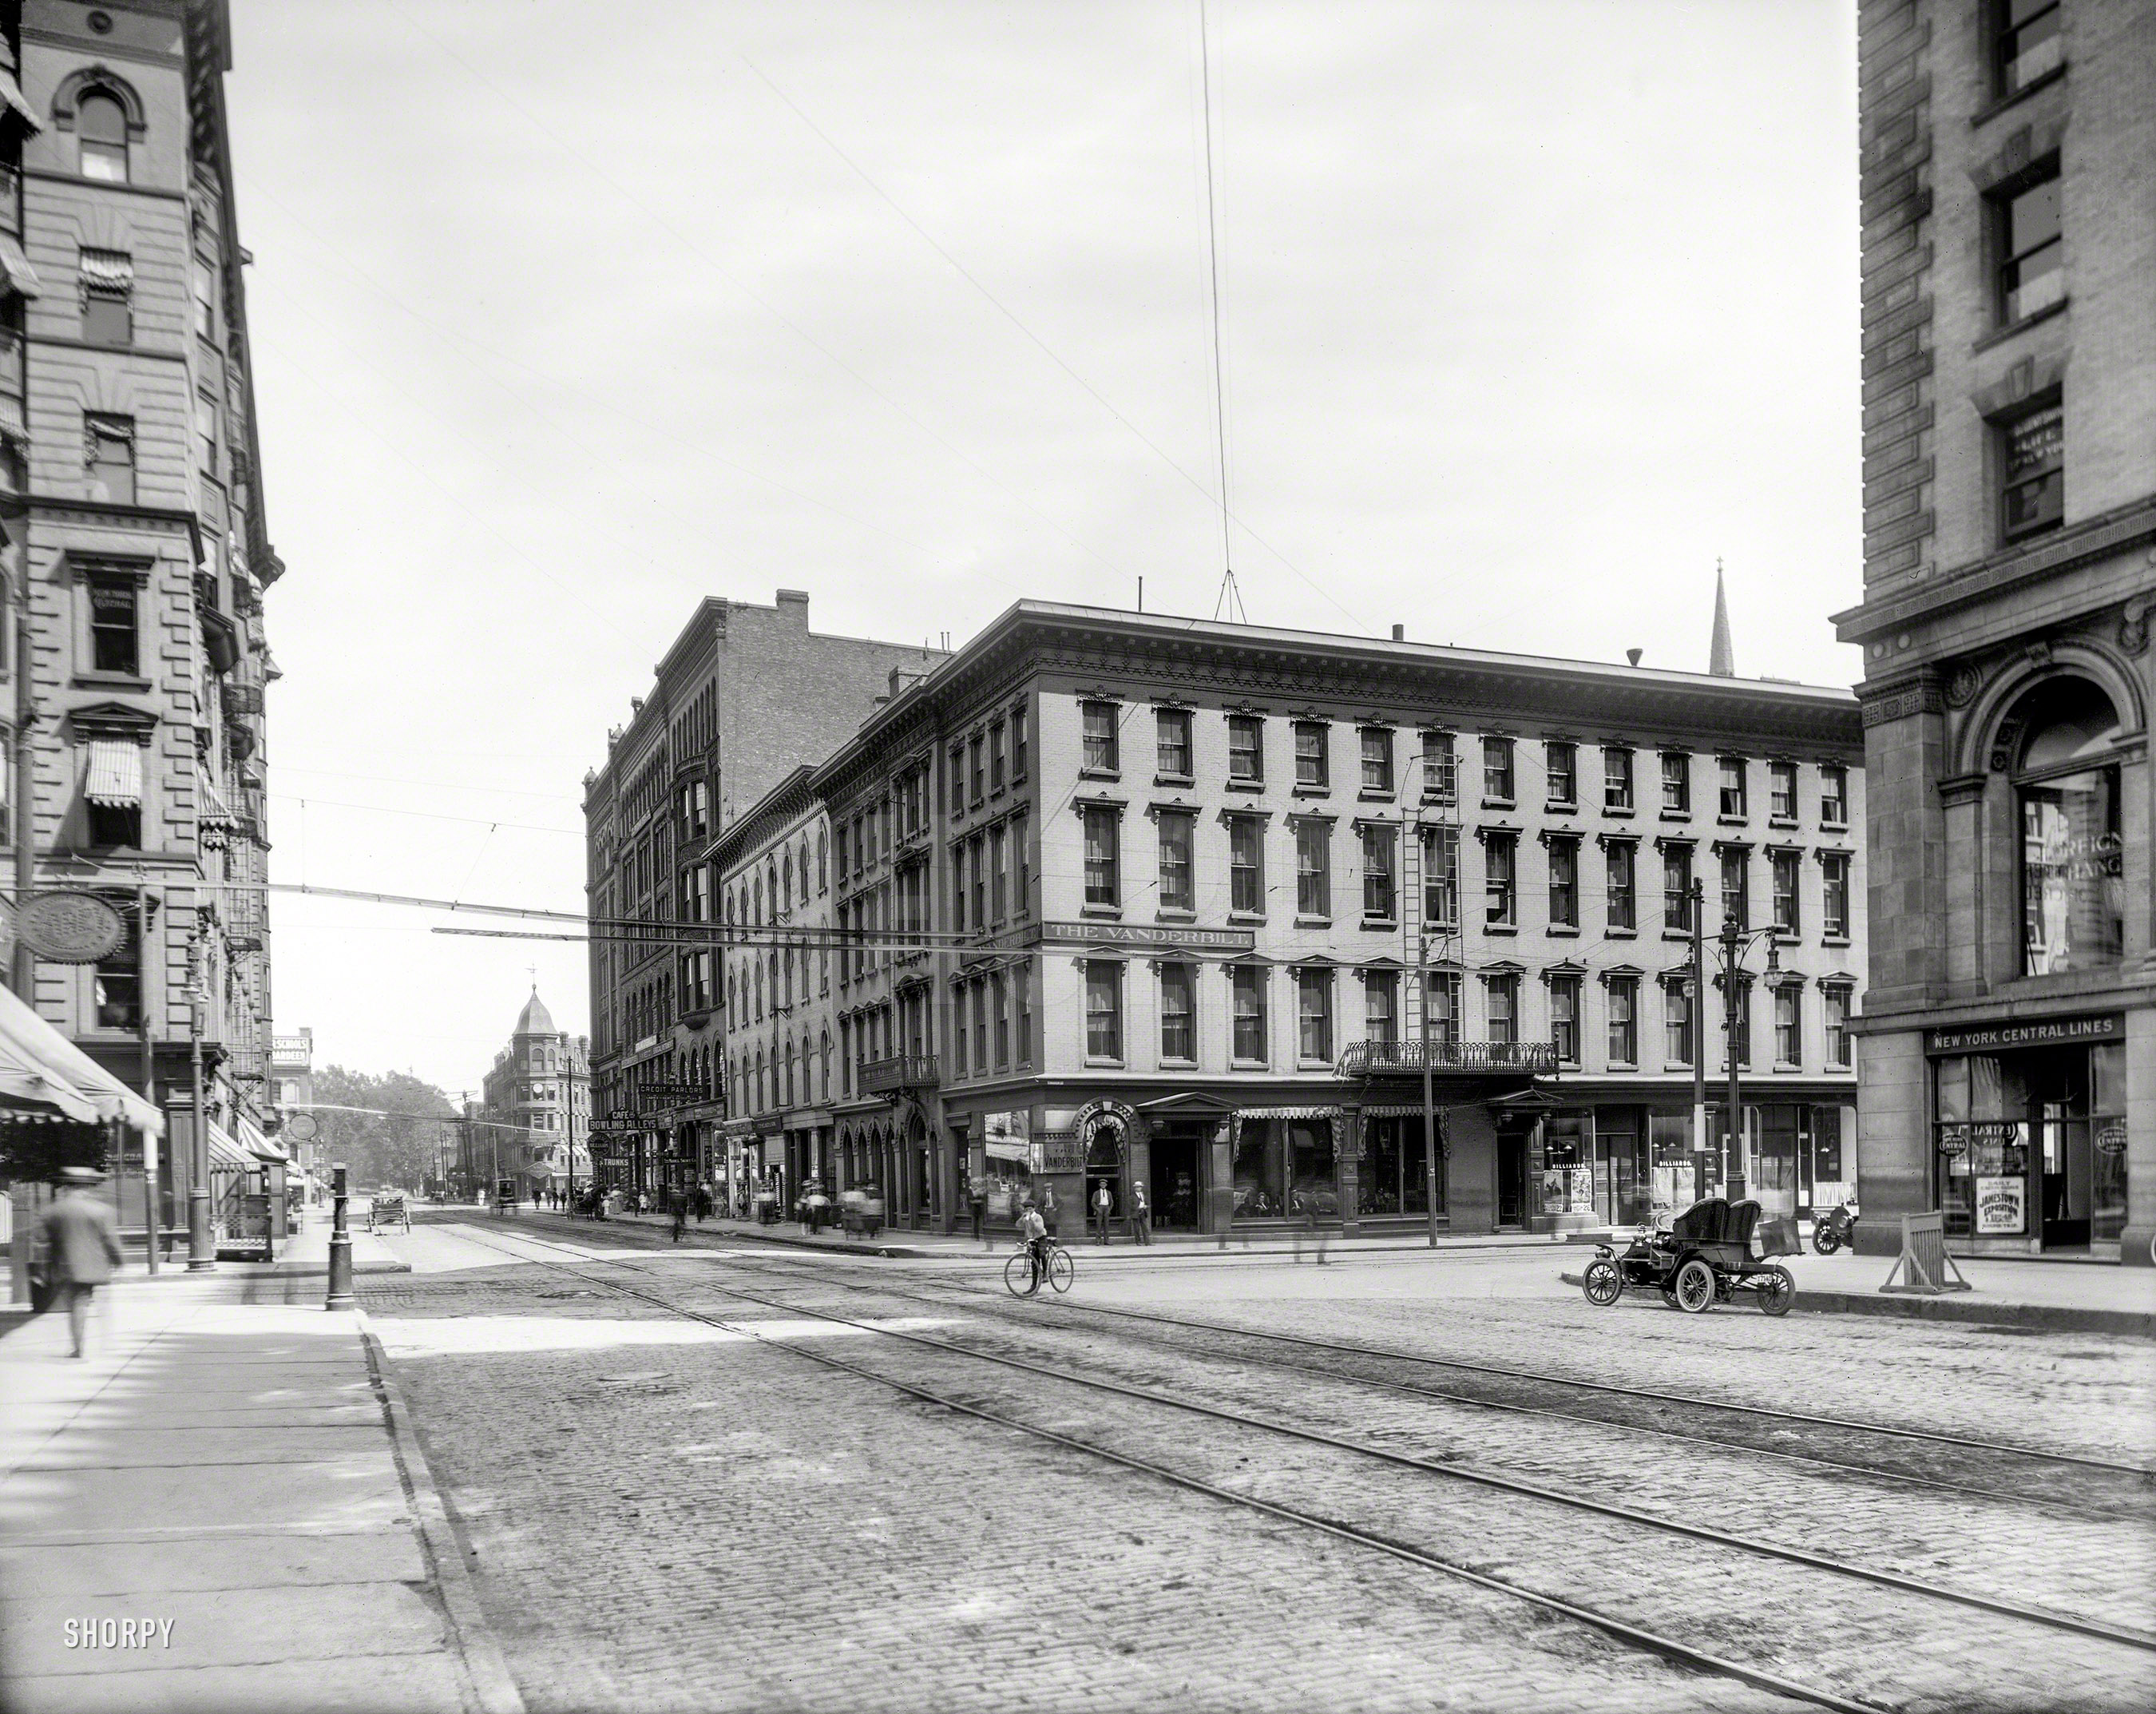 Syracuse, New York, 1907. "Vanderbilt House." With "Credit Parlors," billiards, a bowling alley and Trunks just around the corner. 8x10 inch dry plate glass negative, Detroit Publishing Company. View full size.